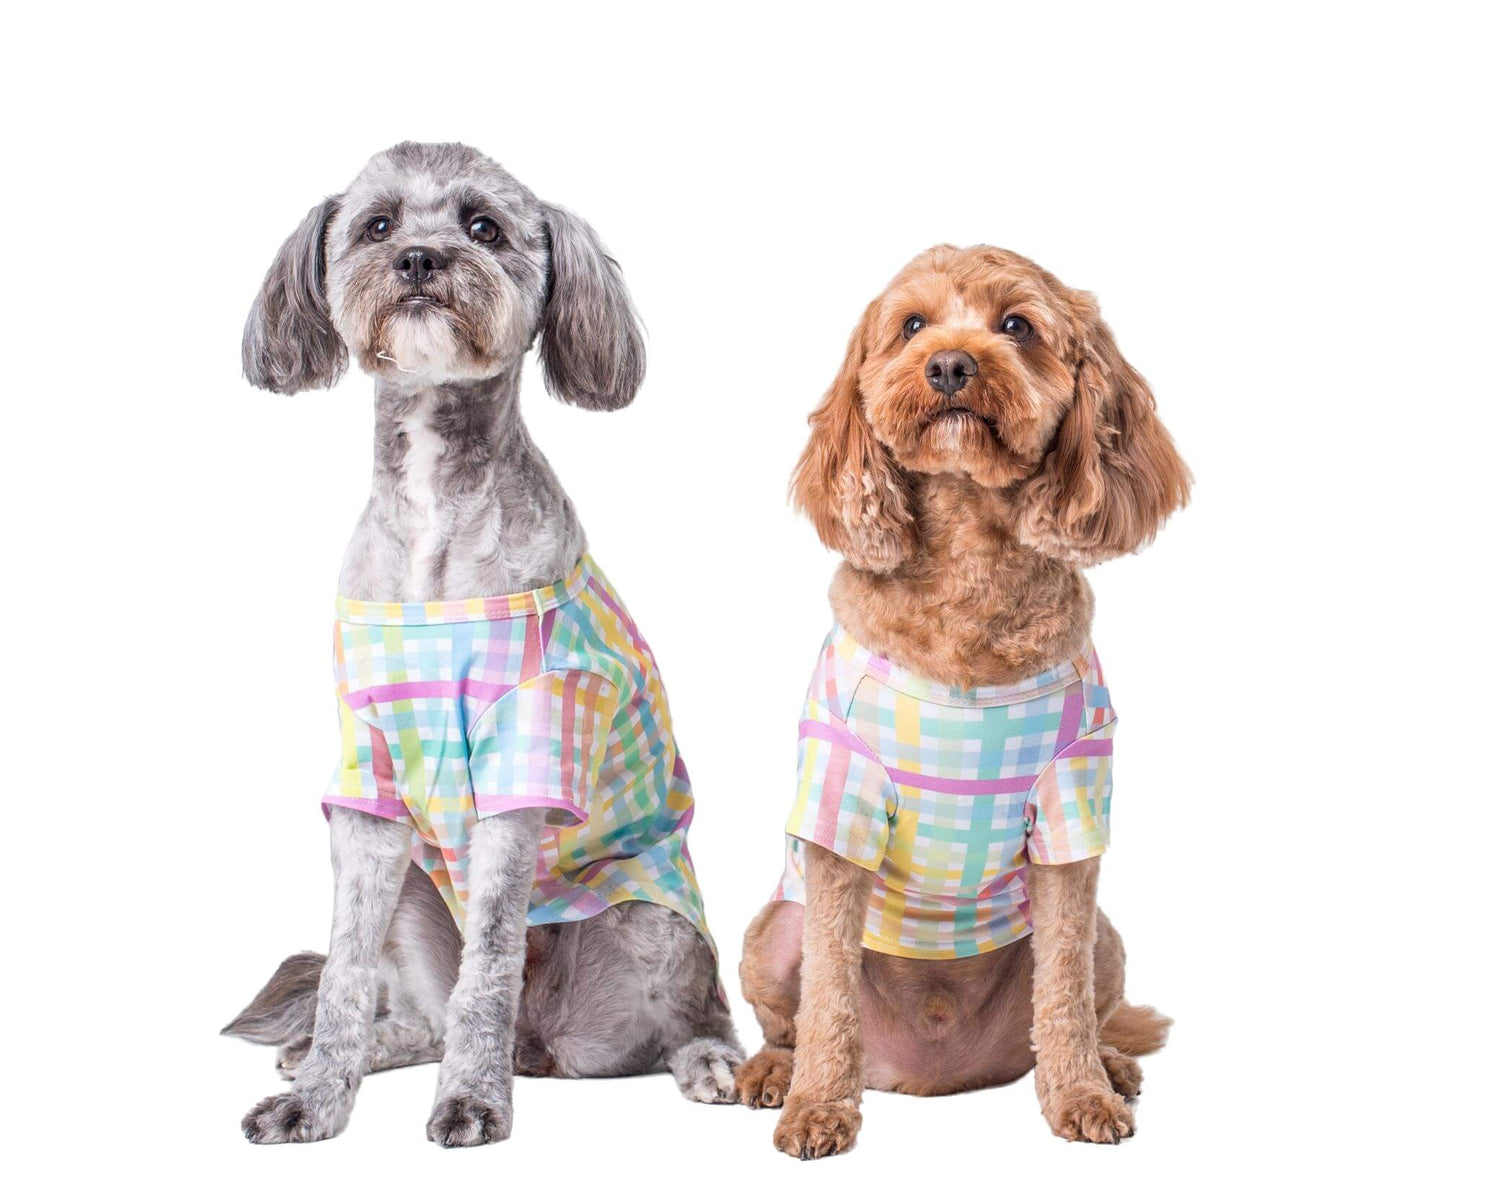 Two adorable Cavoodle dogs wearing Colour Me Gingham shirts for dogs by Vibrant Hound, featuring a vibrant rainbow color scheme - perfect dog shirts and clothing for dogs.